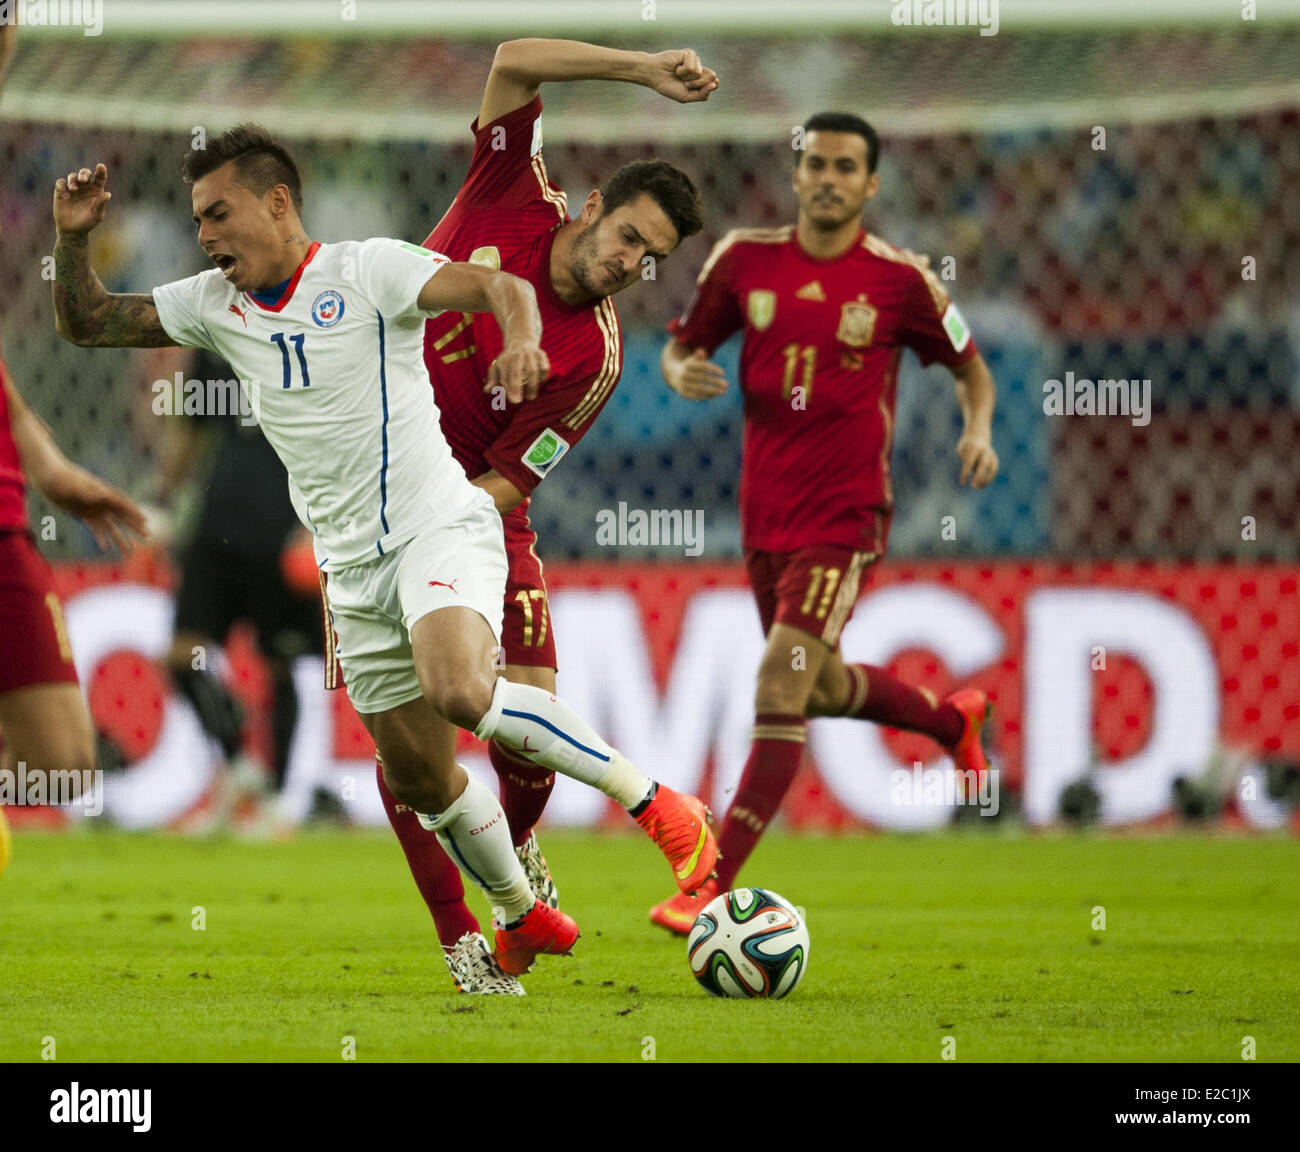 Porto Alegre, Brazil. 18th June, 2014.  Eduardo Vargas and Koke in the match between Spain and Chile in the group stage of the 2014 World Cup, for the group B match at the Beira Rio stadium, on June 18, 2014  Credit:  Urbanandsport/NurPhoto/ZUMAPRESS.com/Alamy Live News Stock Photo